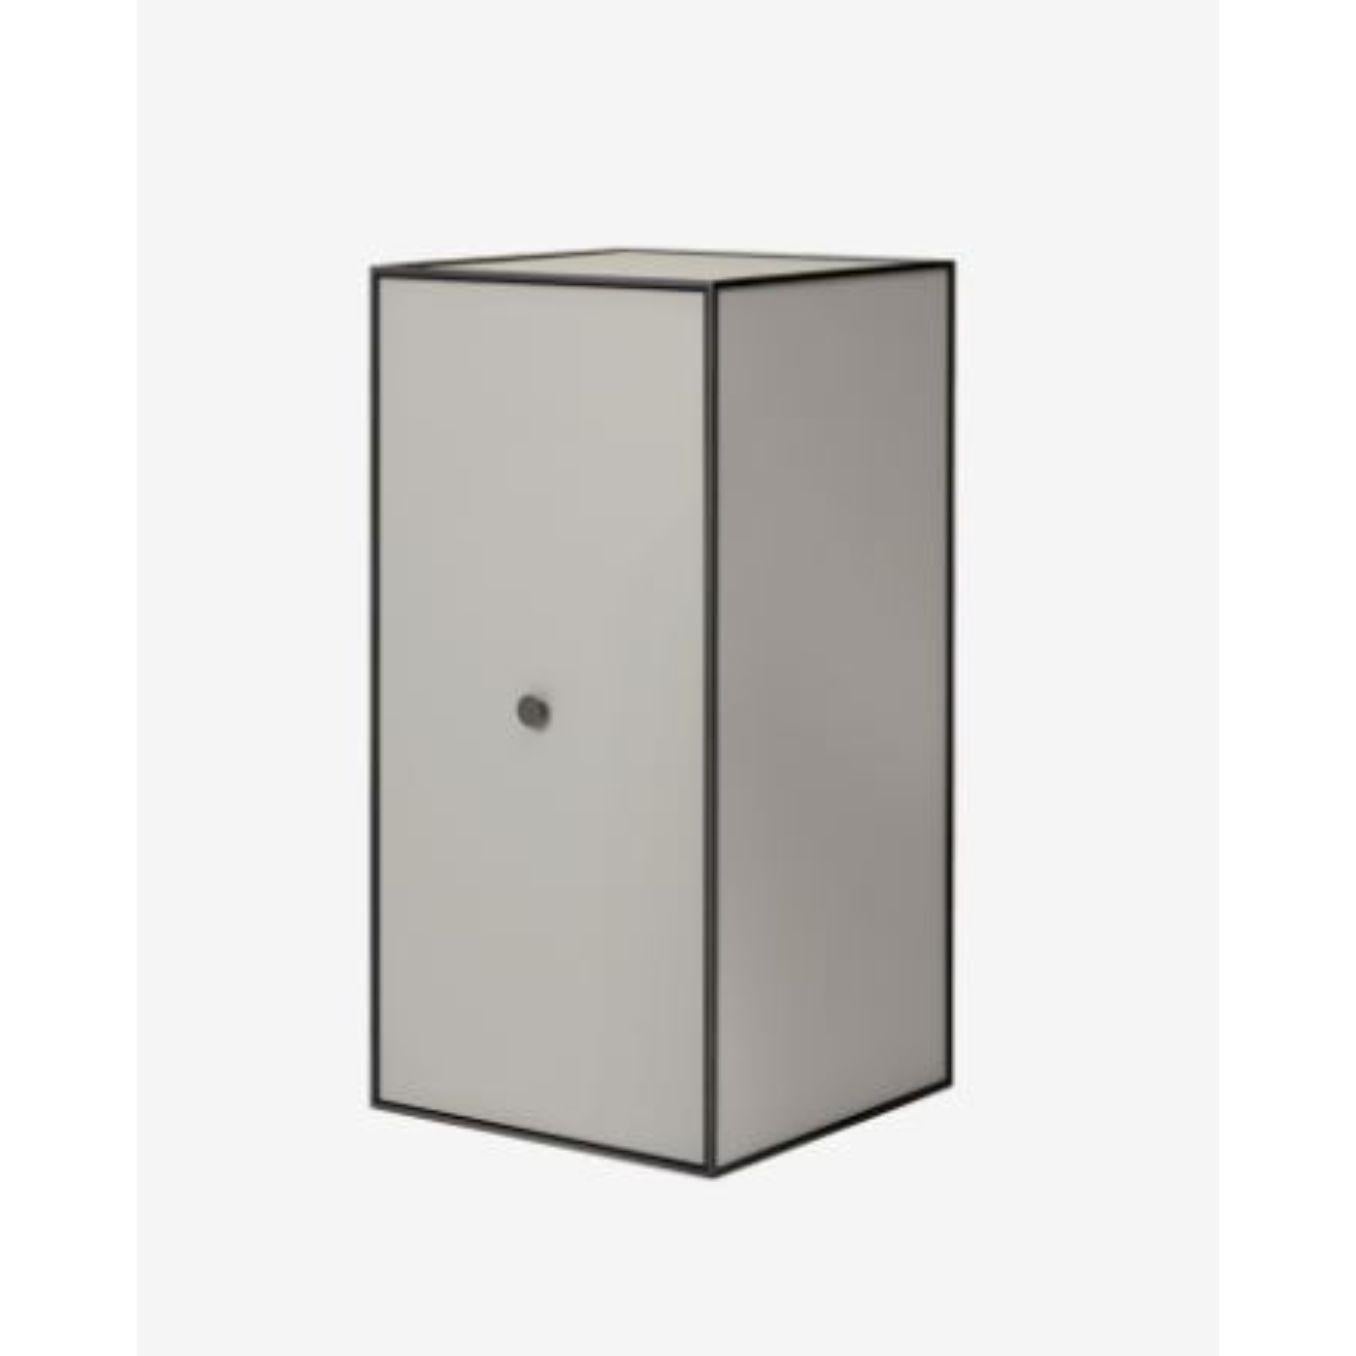 70 sand frame box with 2 shelves / door by Lassen
Dimensions: D 35 x W 35 x H 70 cm 
Materials: Finér, melamin, melamin, melamine, metal, veneer
Also available in different colours and dimensions. 
Weight: 13 kg


By Lassen is a Danish design